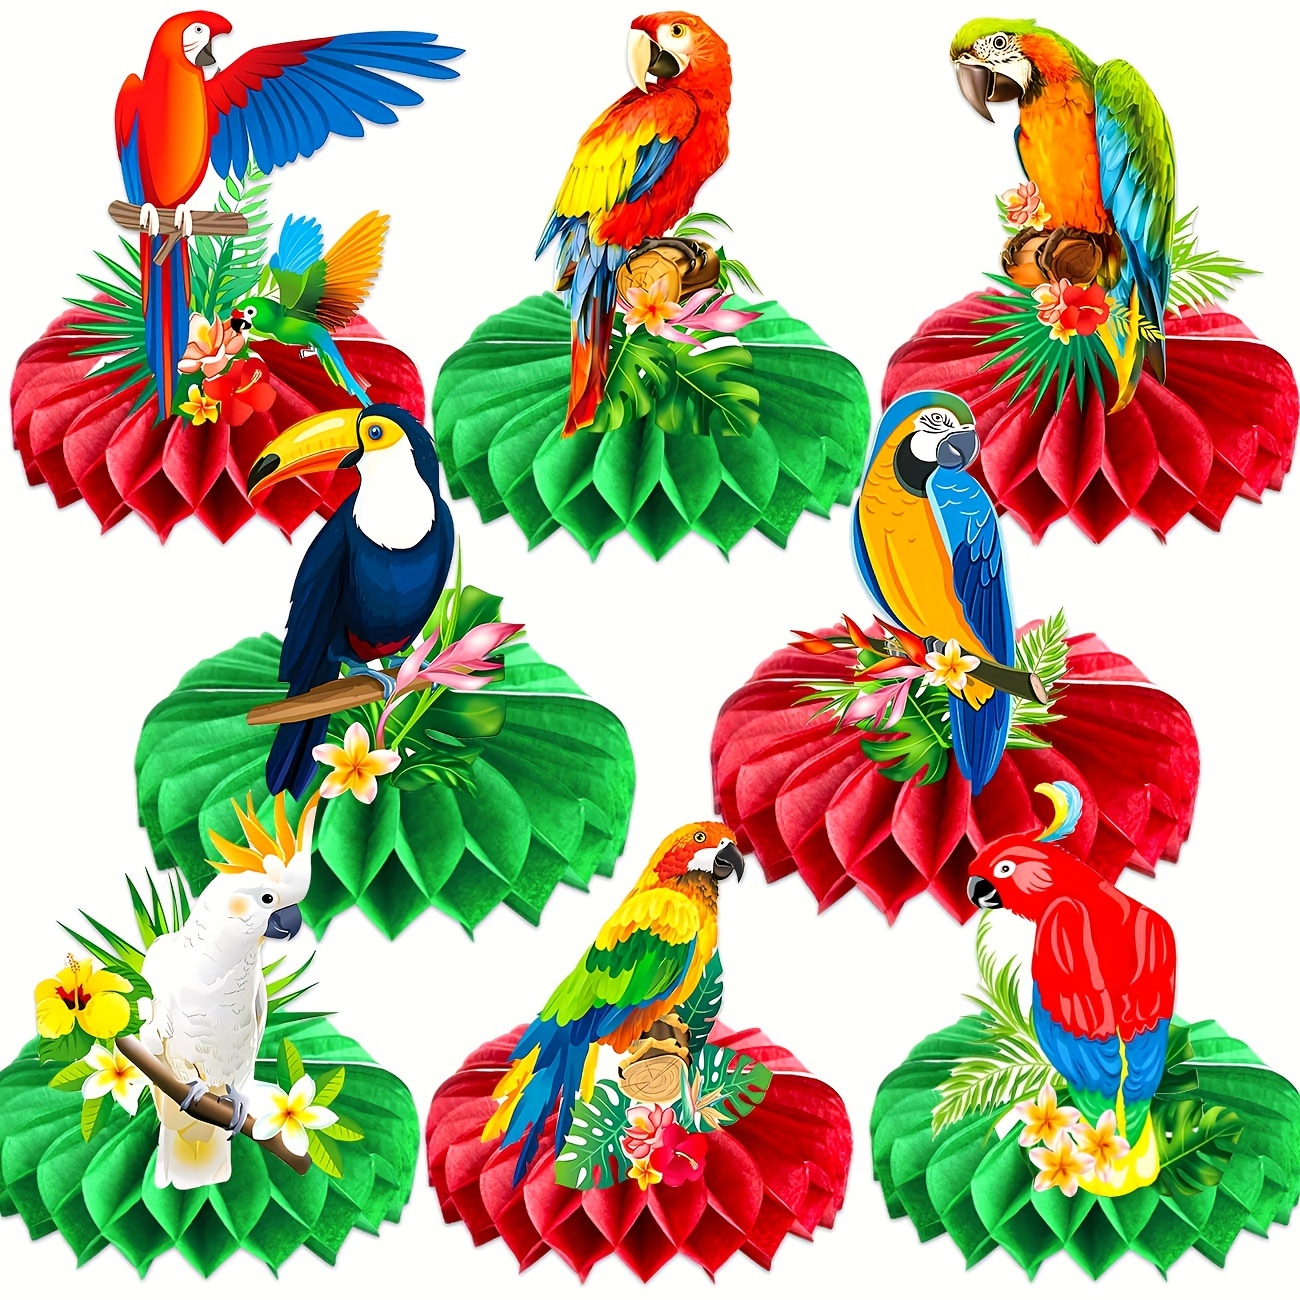 

8pcs Parrot Honeycomb Centerpieces - Tropical Bird Party Supplies For Hawaiian Luau, Rainforest Birds Baby Shower Decorations - Mixed Color Paper Table Decor With No Feathers